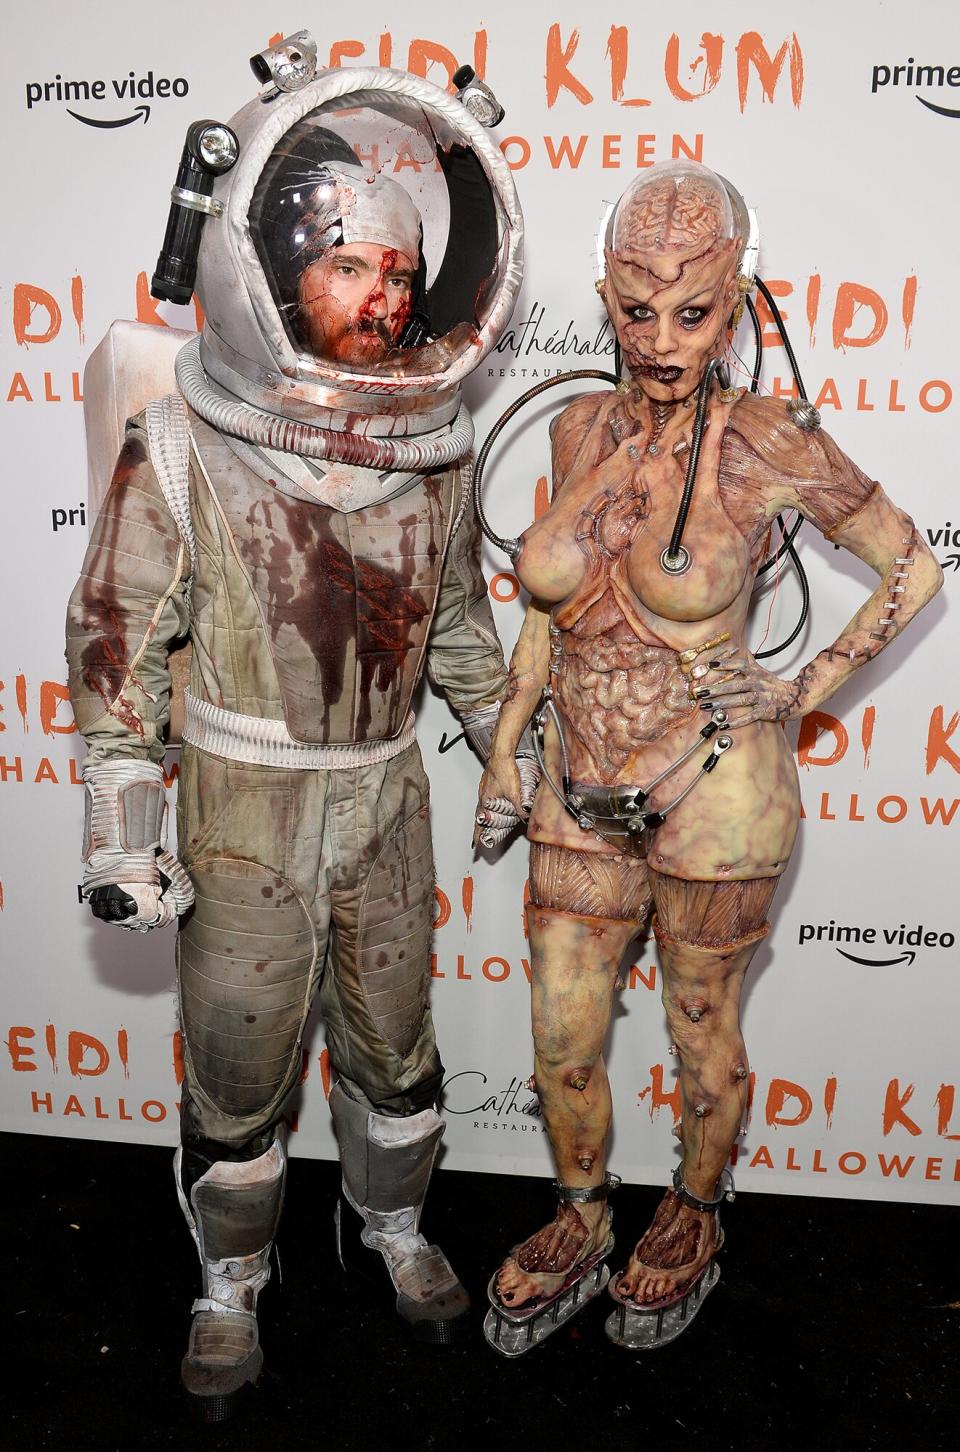 Tom Kaulitz (L) and Heidi Klum attend Heidi Klum's 20th Annual Halloween Party presented by Amazon Prime Video and SVEDKA Vodka at Cathédrale New York on October 31, 2019 in New York City